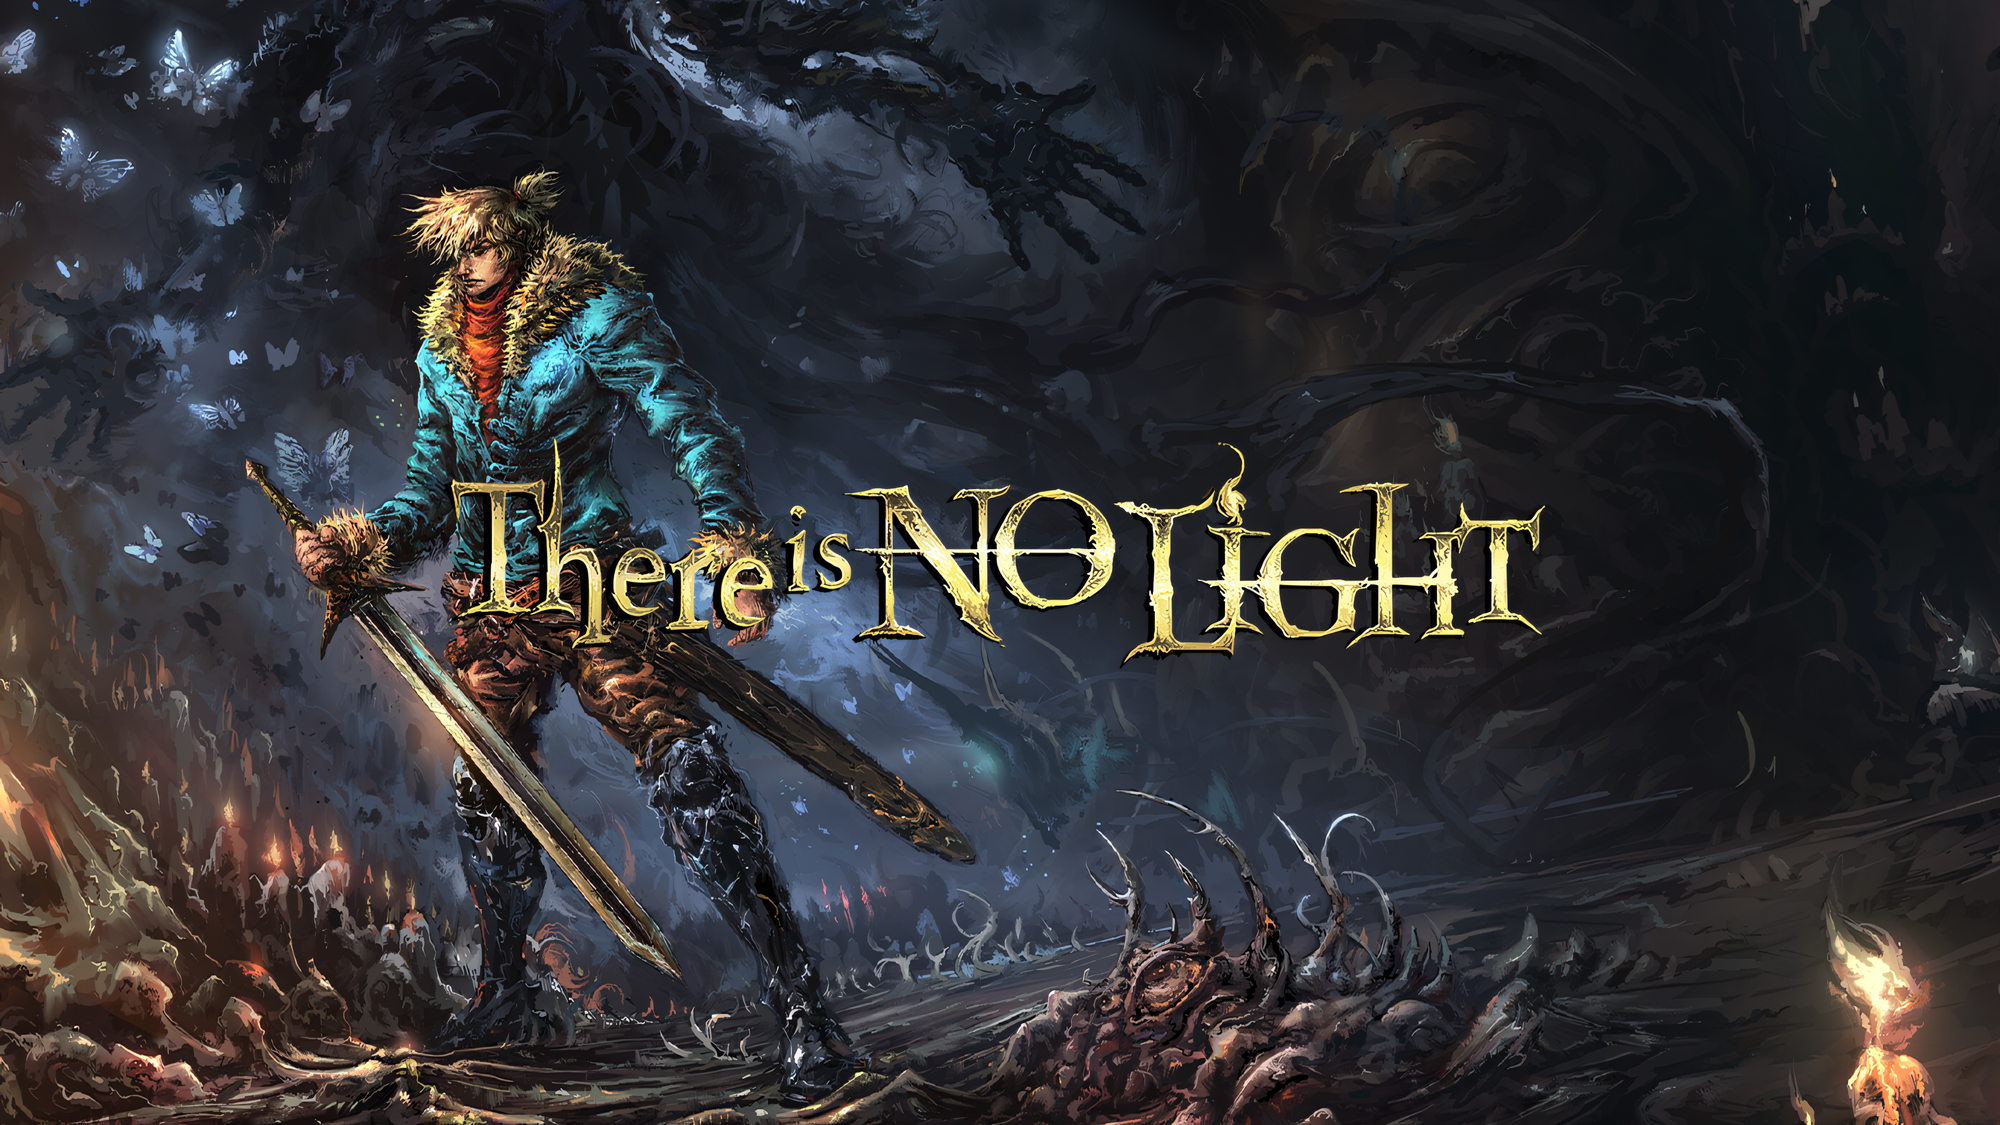 blog feature過酷な地下世界を巡って戦え！『There is no light ～終わりなき暗闇～』約1年越しの日本語サポート